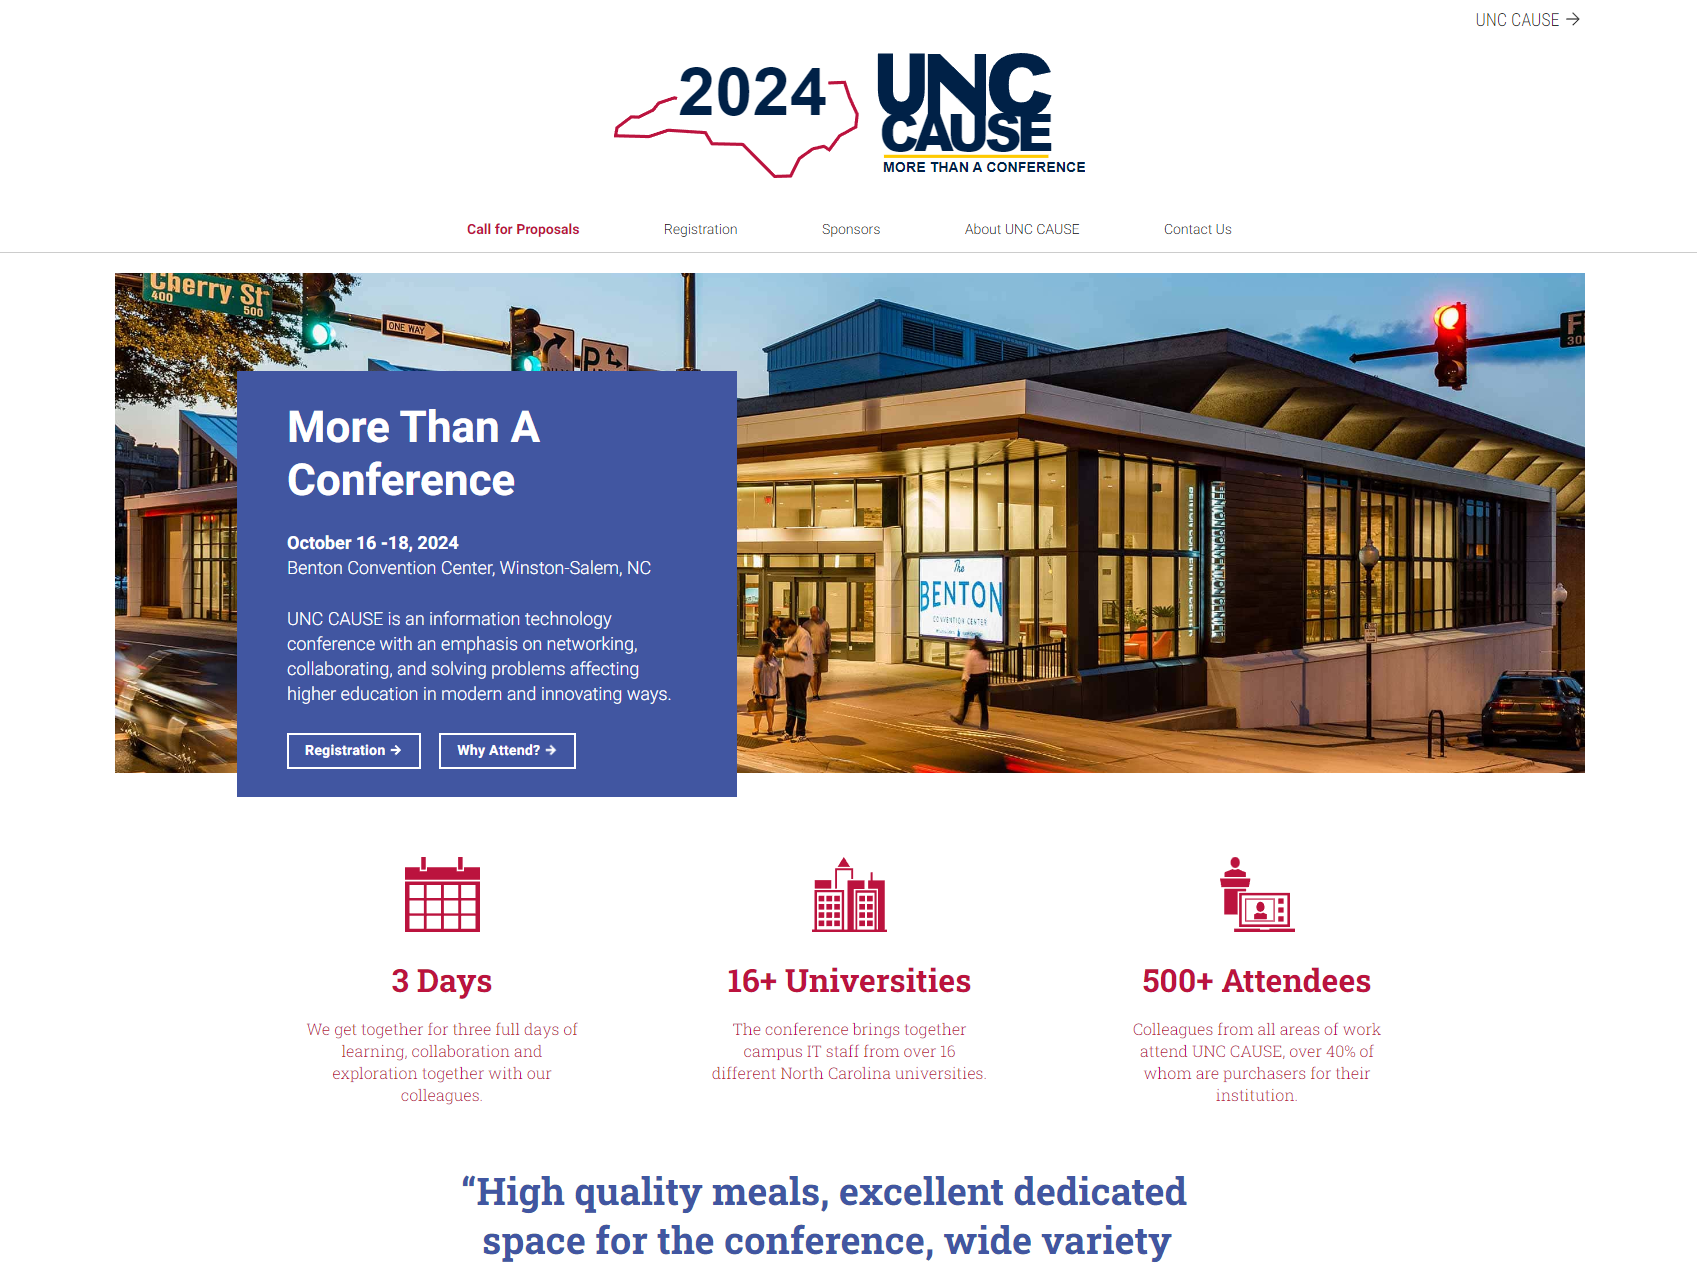 A screenshot of UNC CAUSE 2024's home page.